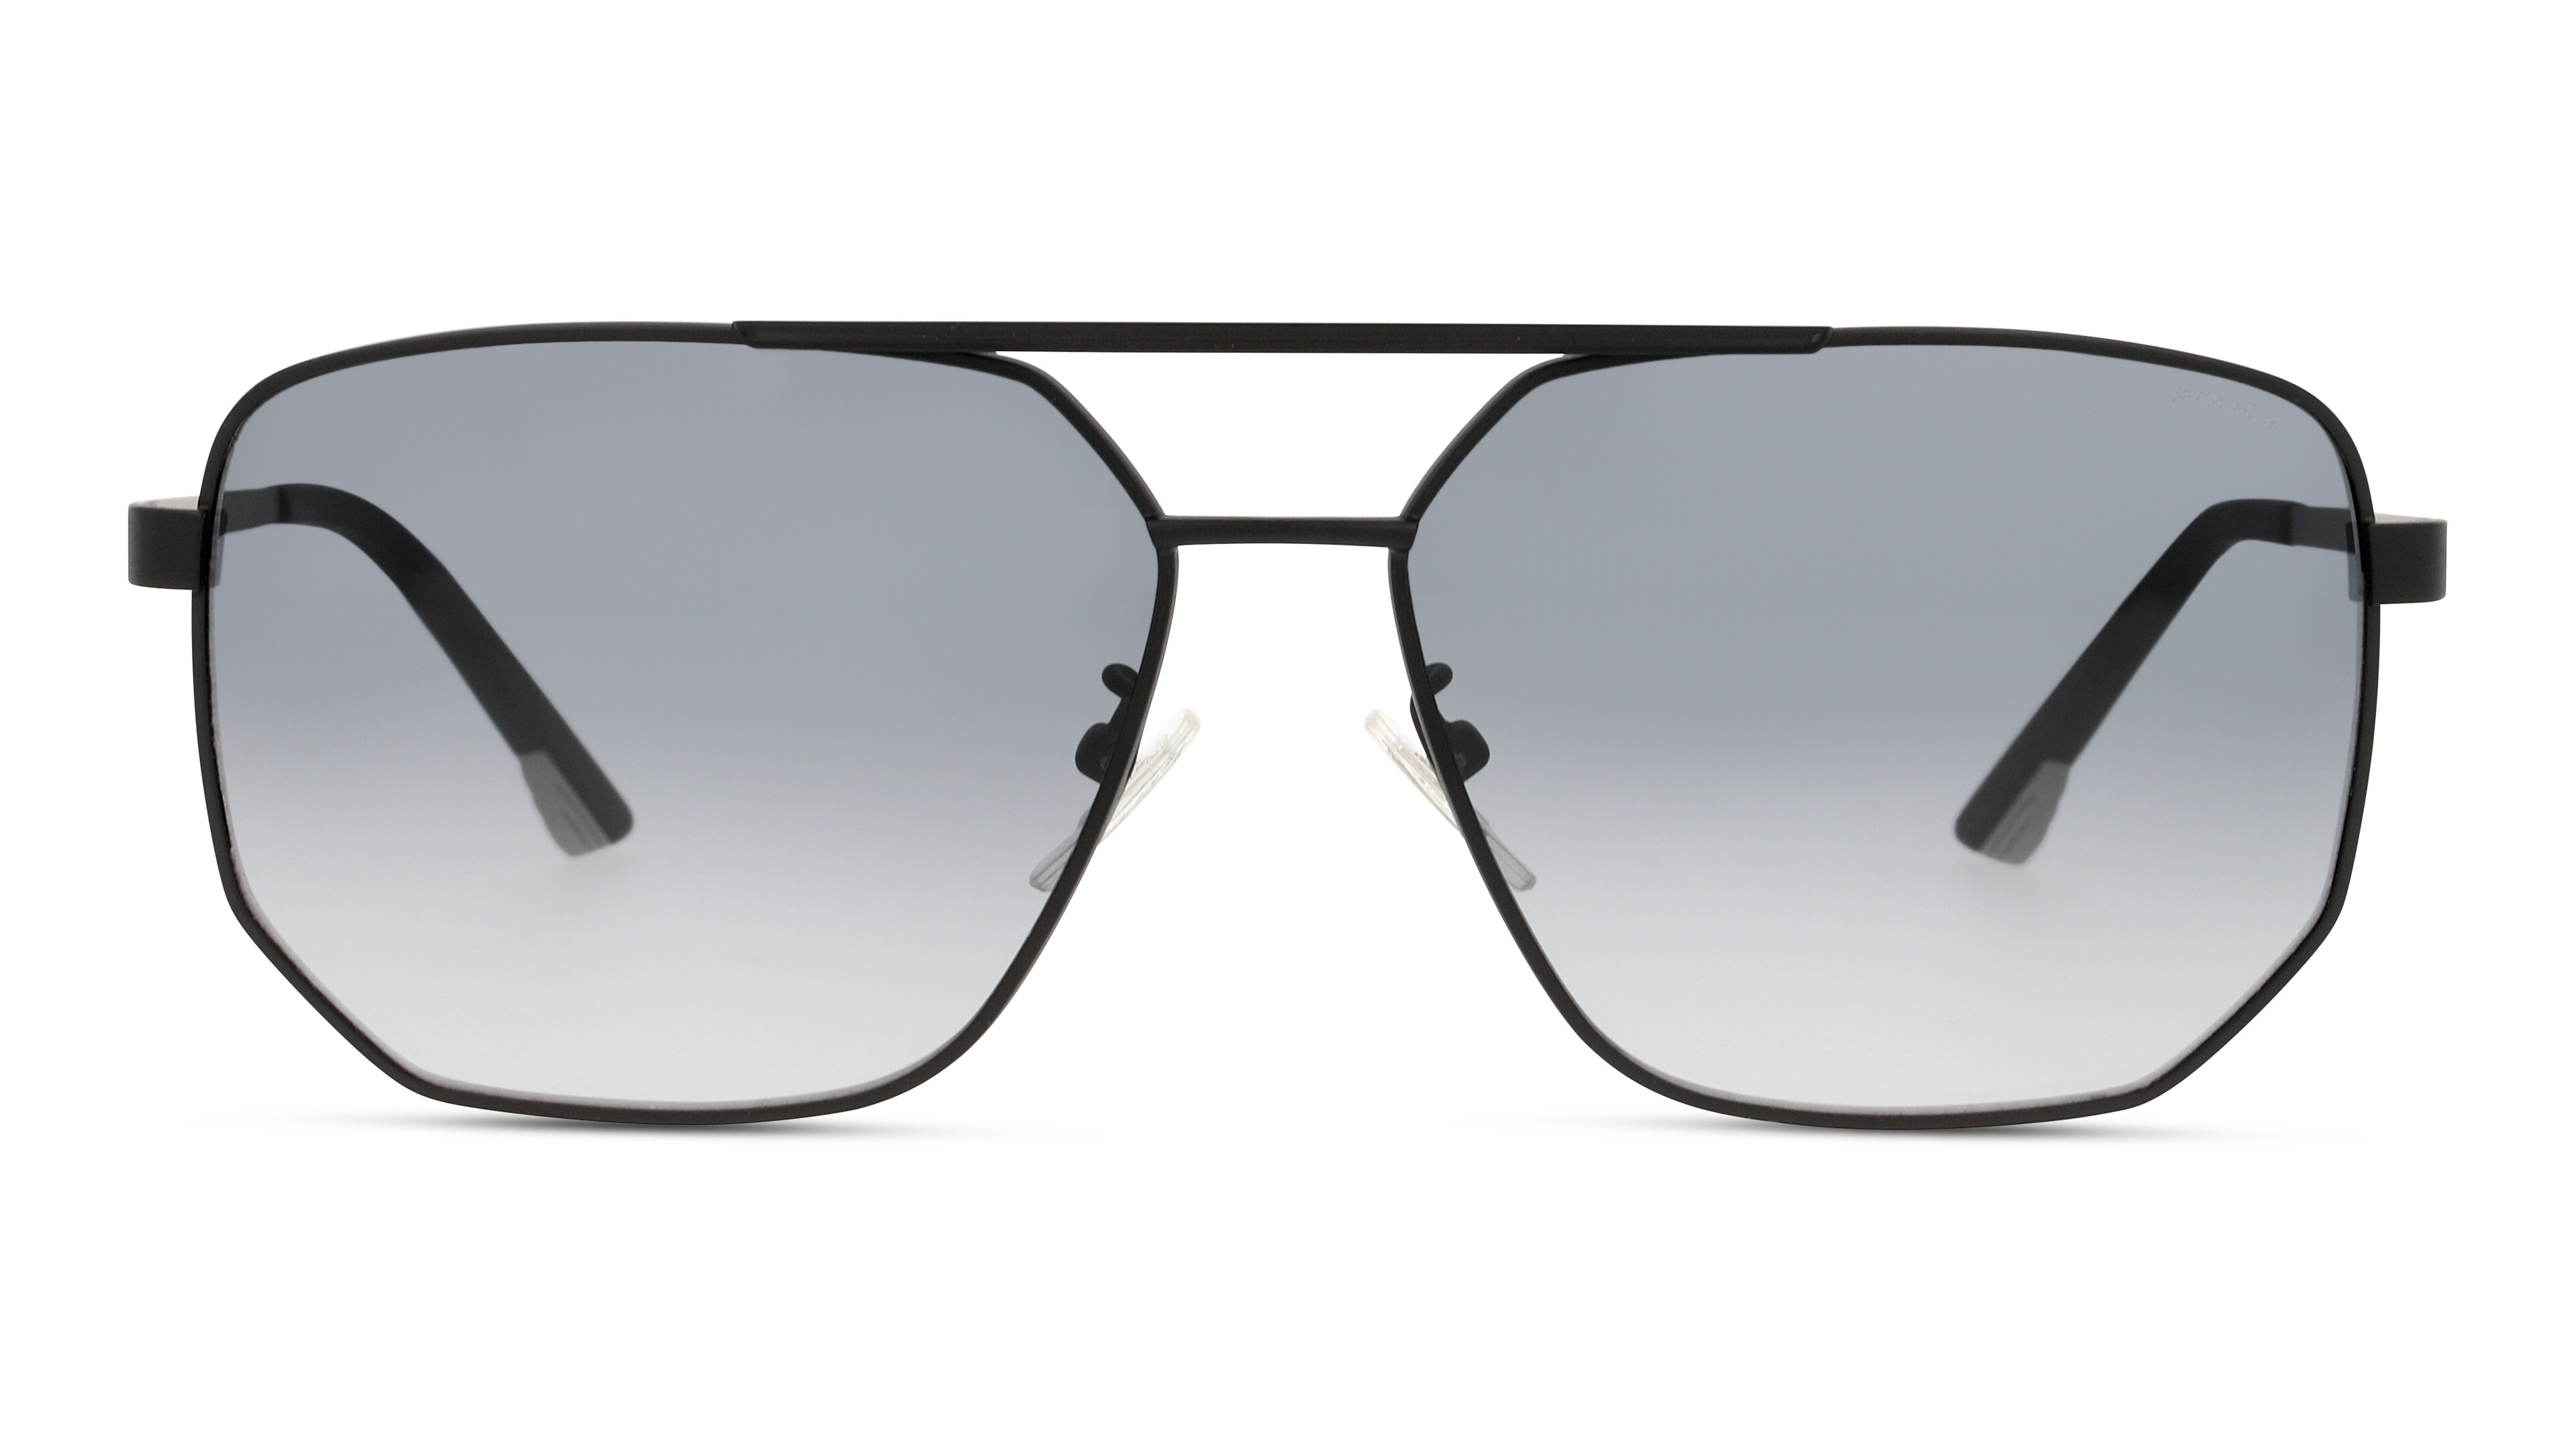 [products.image.front] Police SYNTH 1 SPLB36 0531 Sonnenbrille